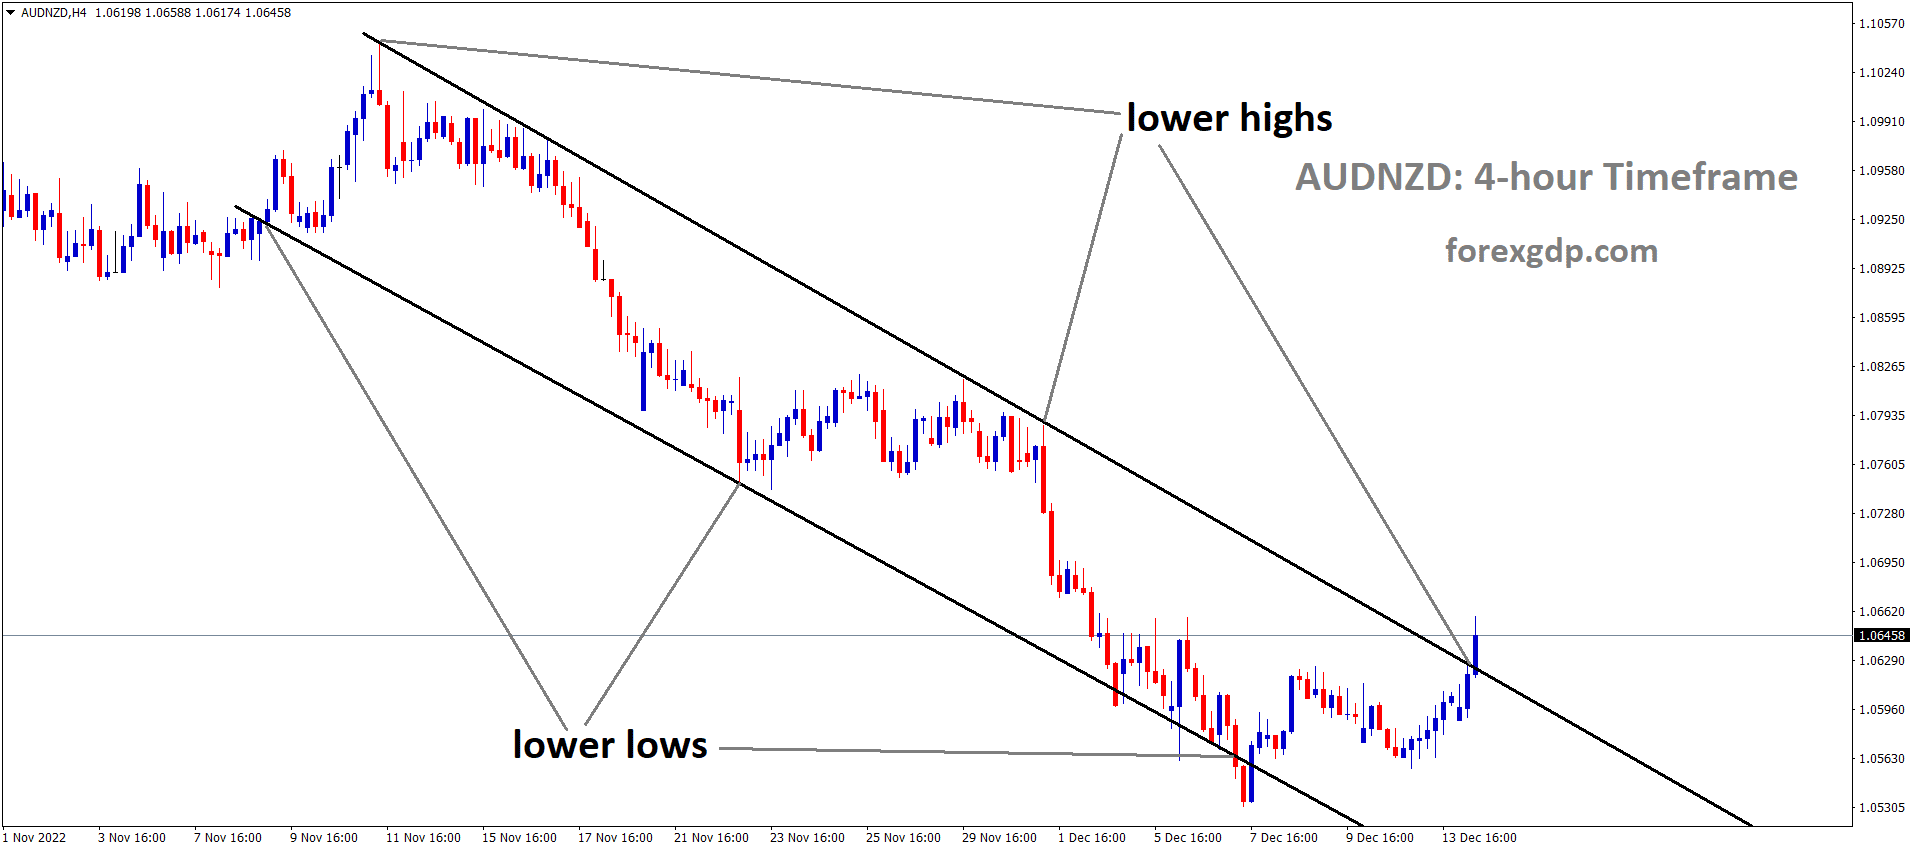 AUDNZD is moving in the Descending channel and the market has reached the lower high area of the channel 2